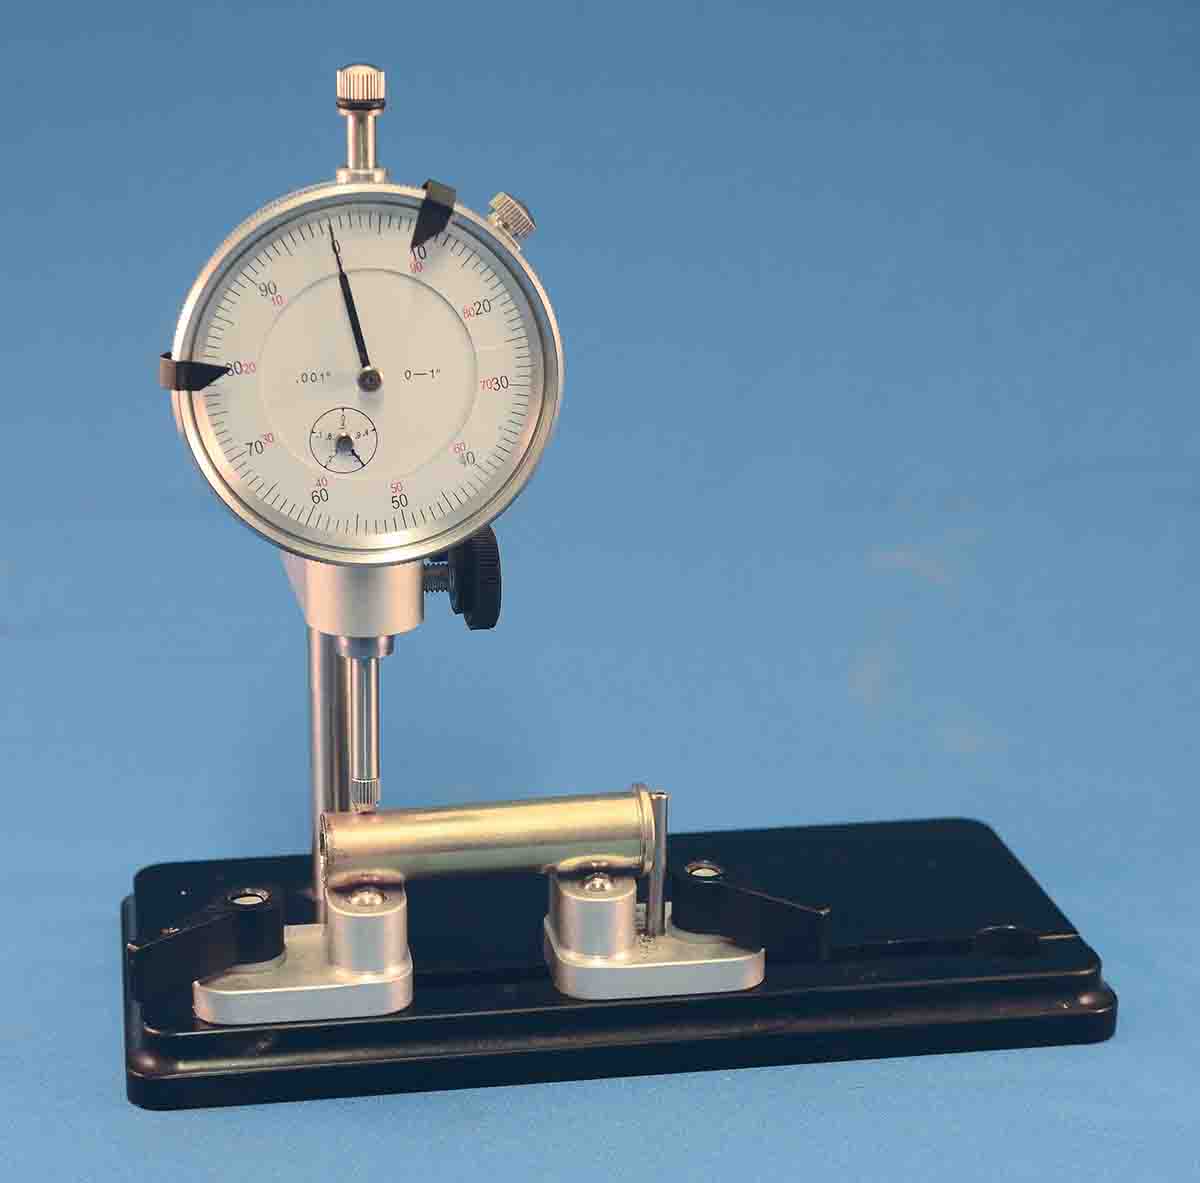 Proper adjustment of Sinclair concentricity gauge for measuring the runout on a full-length sized case.